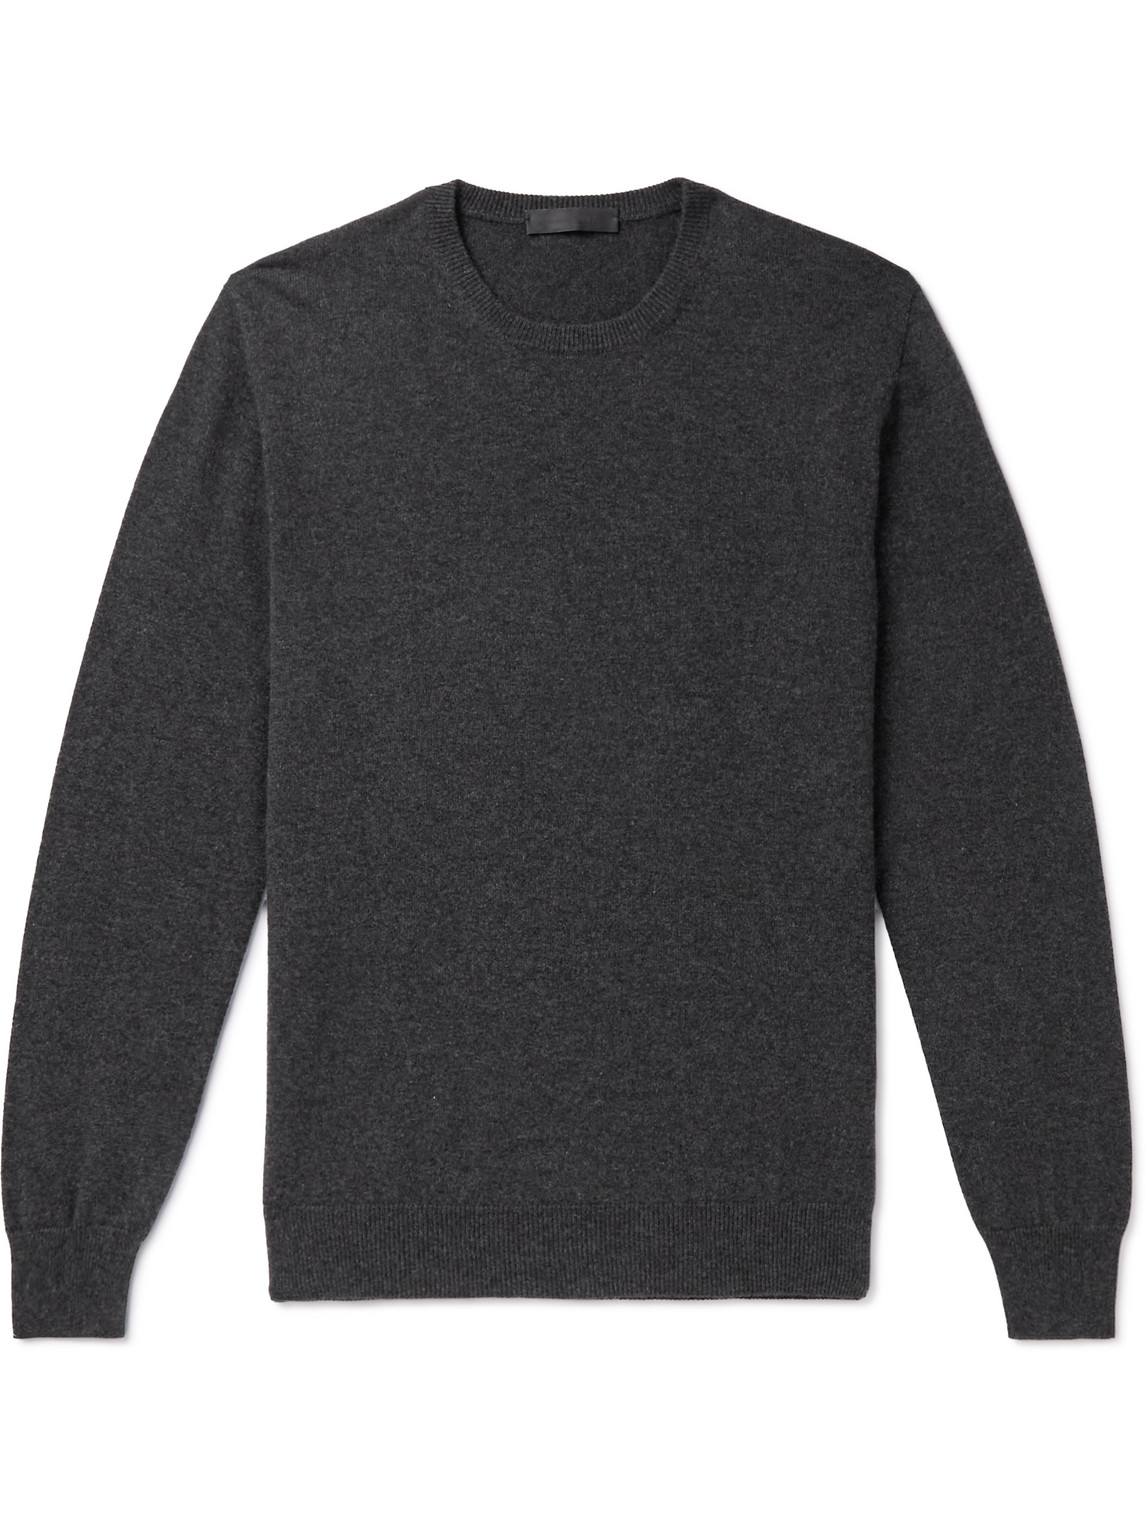 Saman Amel Cashmere Sweater In Gray